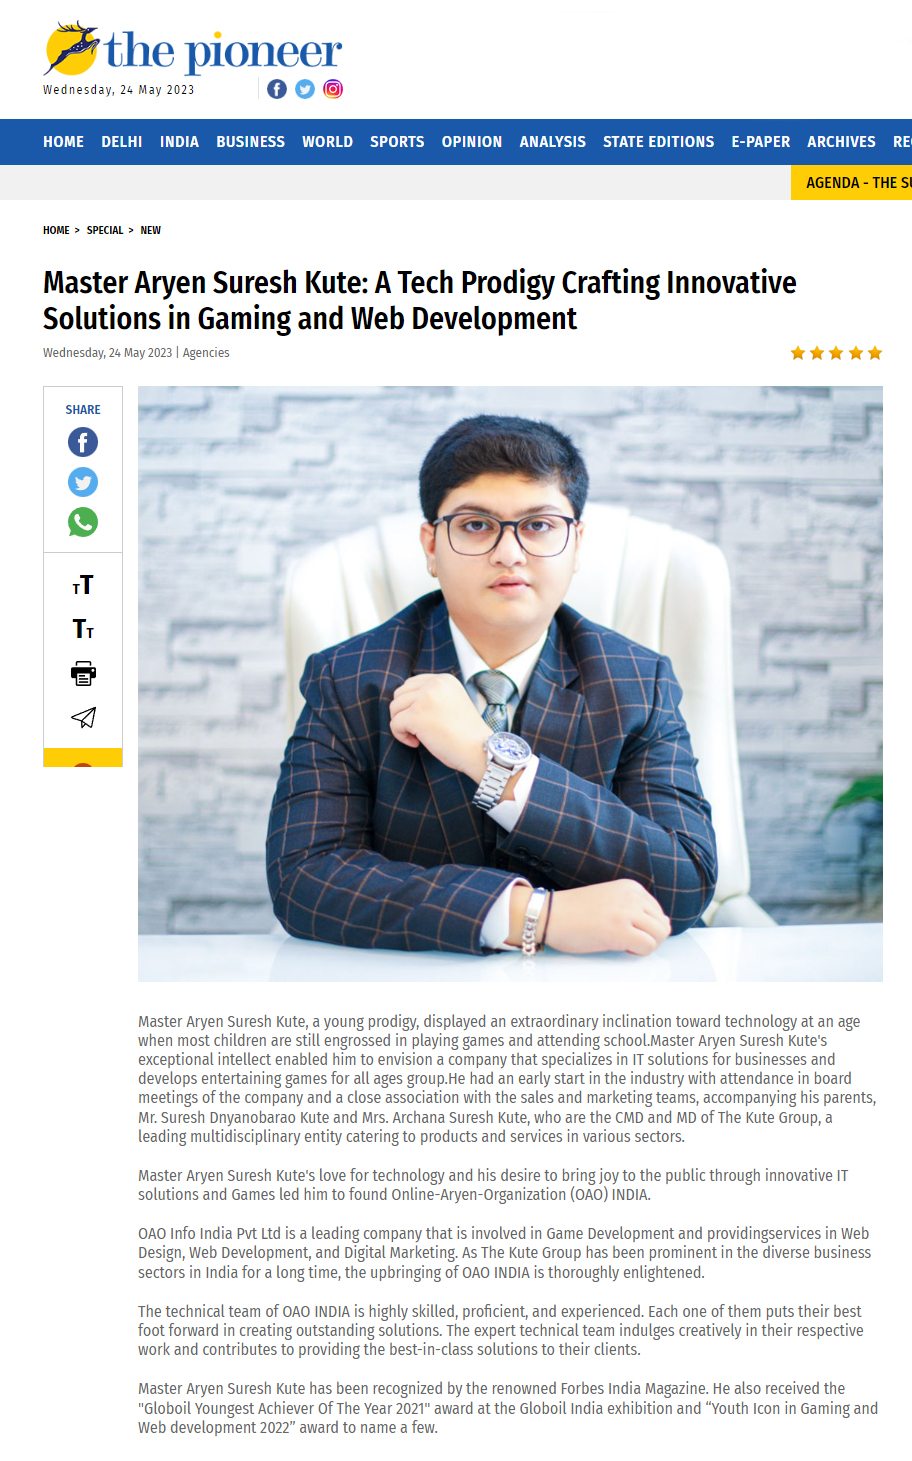 Master Aryen Suresh Kute: A Tech Prodigy Crafting Innovative Solutions in Gaming and Web Development